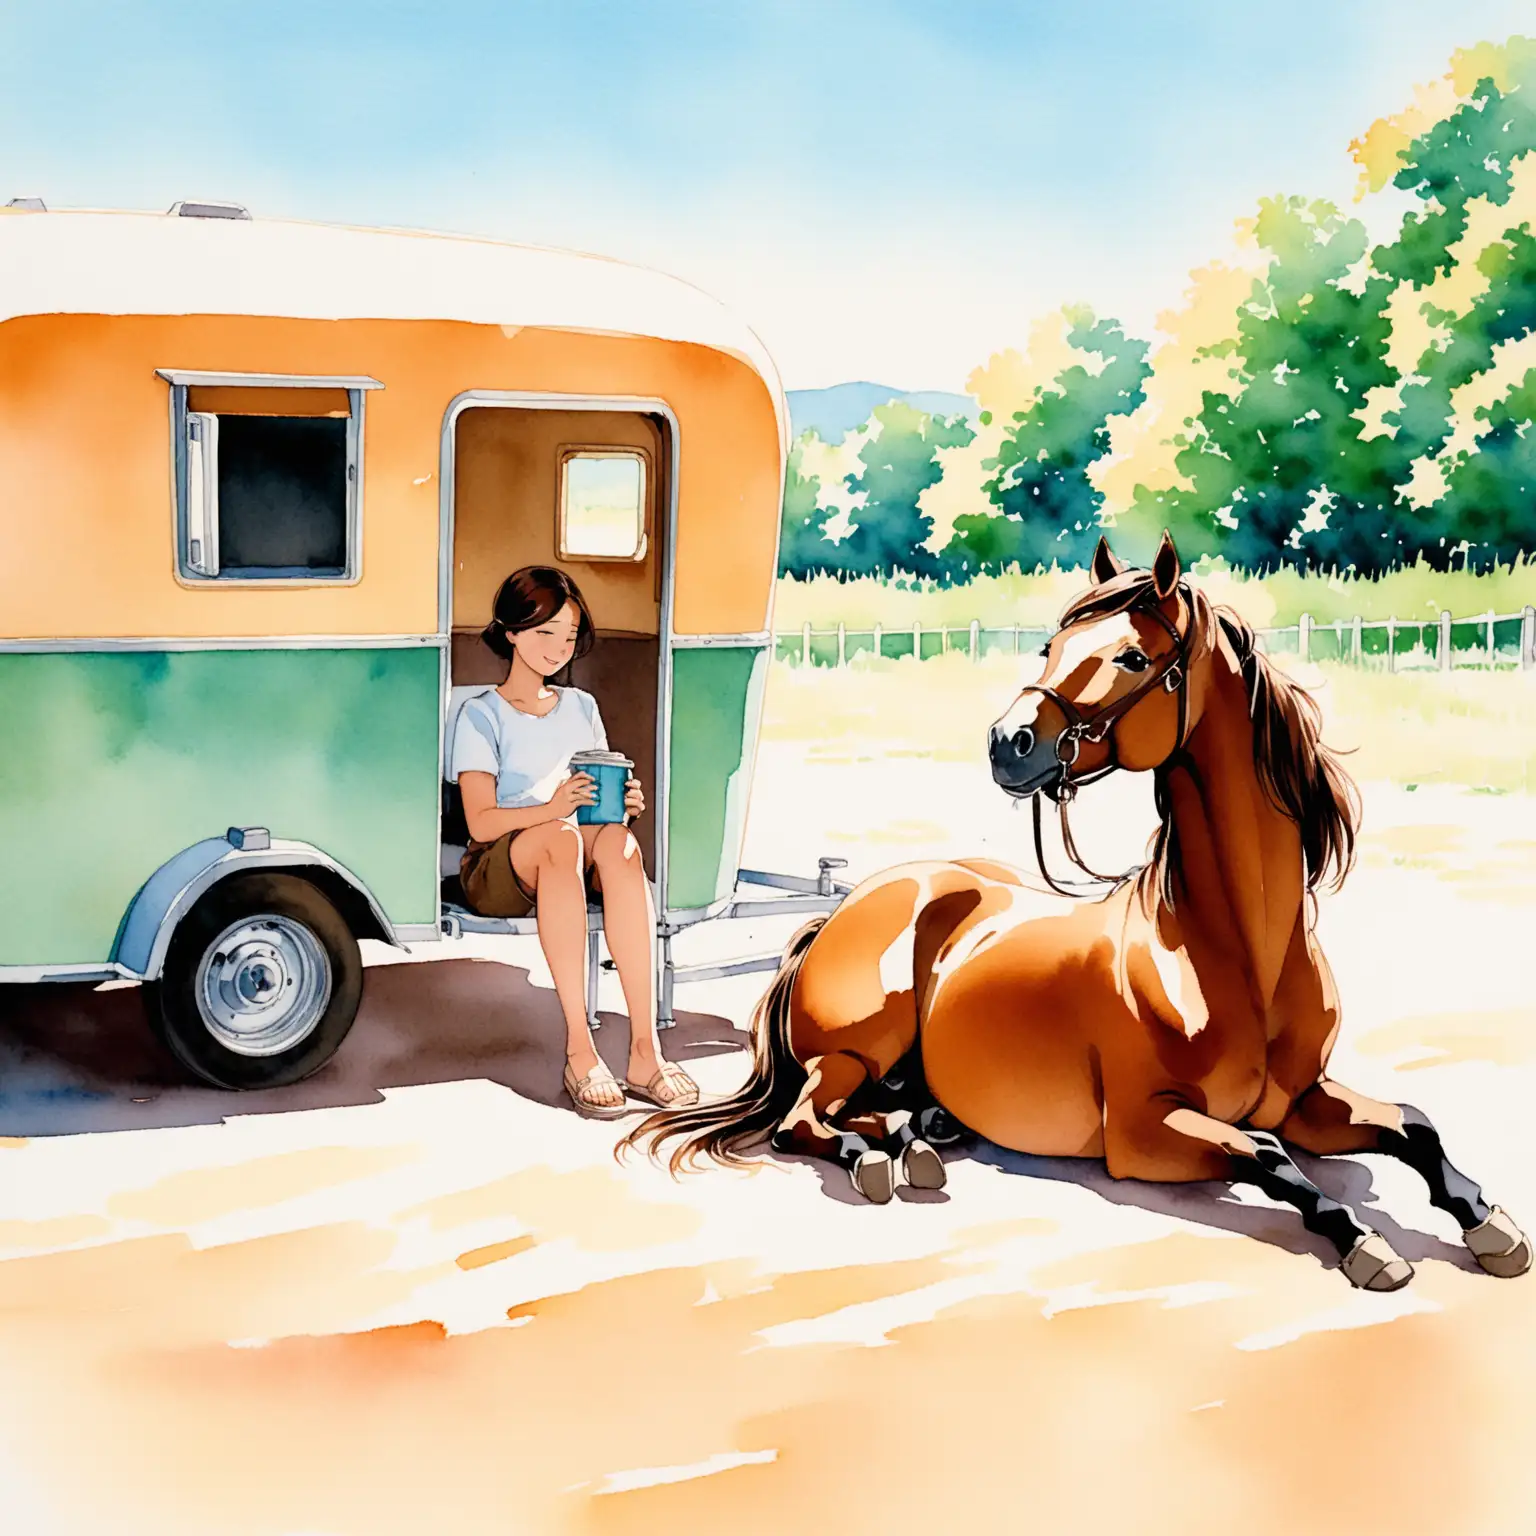 A movie trailer featuring the adventures of lovely brown pony, and his owner, they are relaxing in the sun, watercolors , shot on 35 mm film